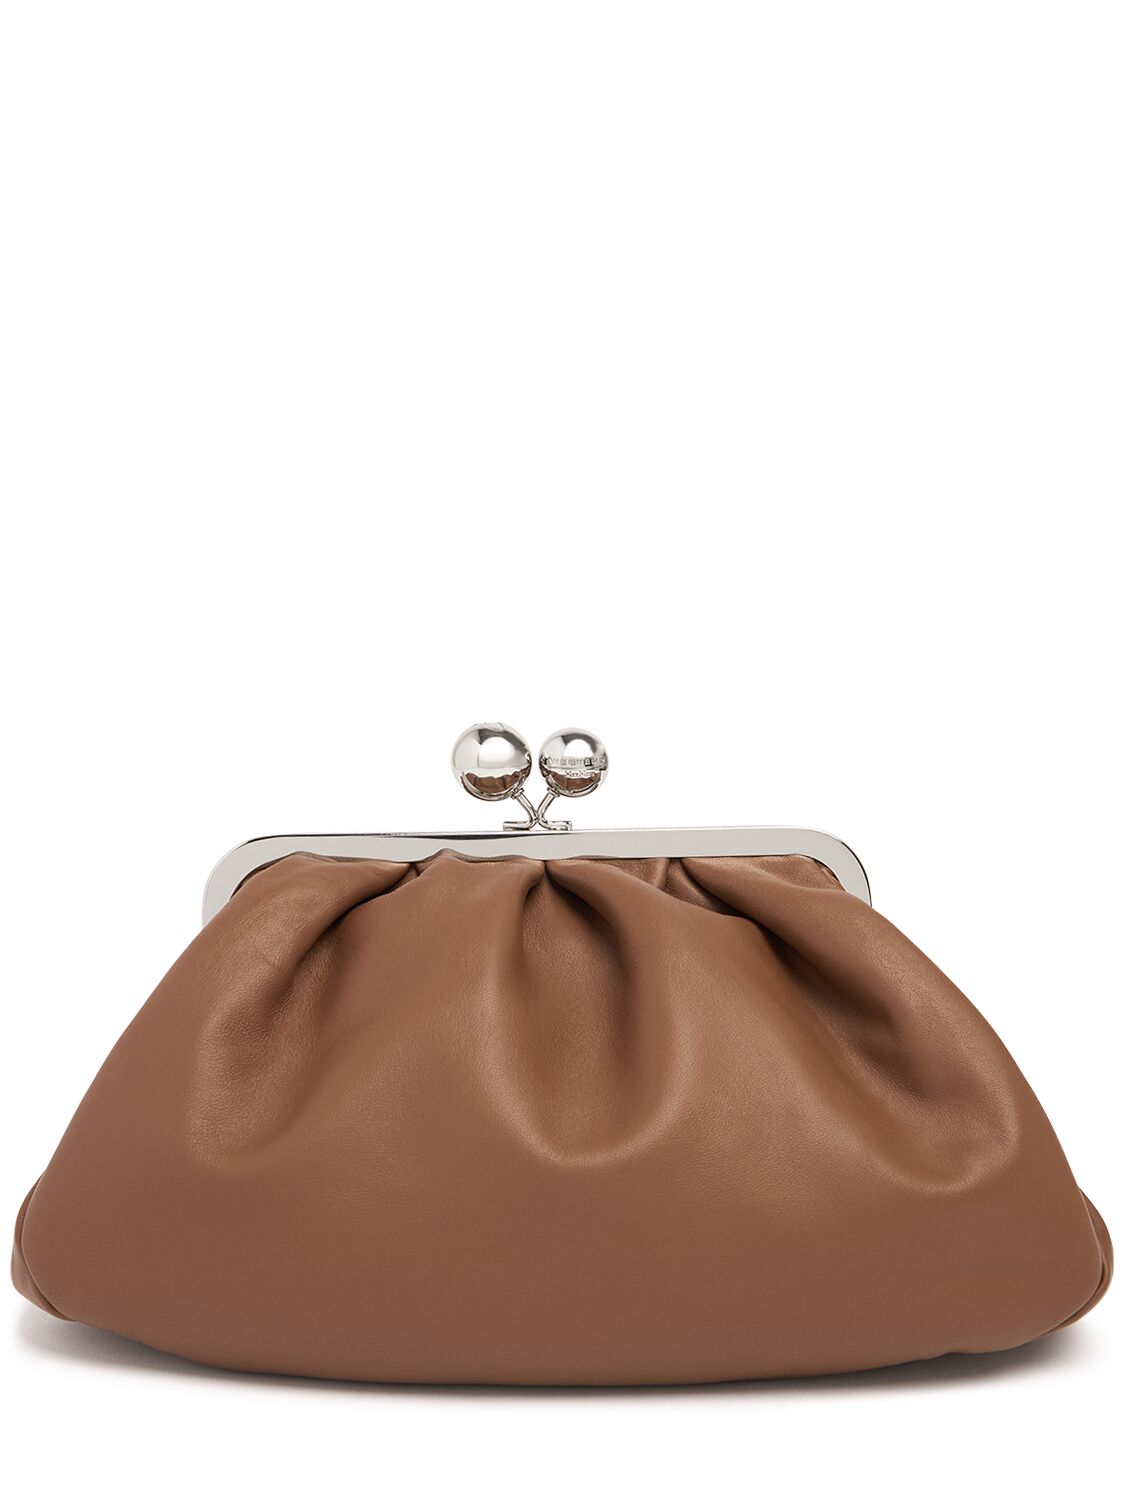 Weekend Max Mara Cubico Leather Clutch In Brown